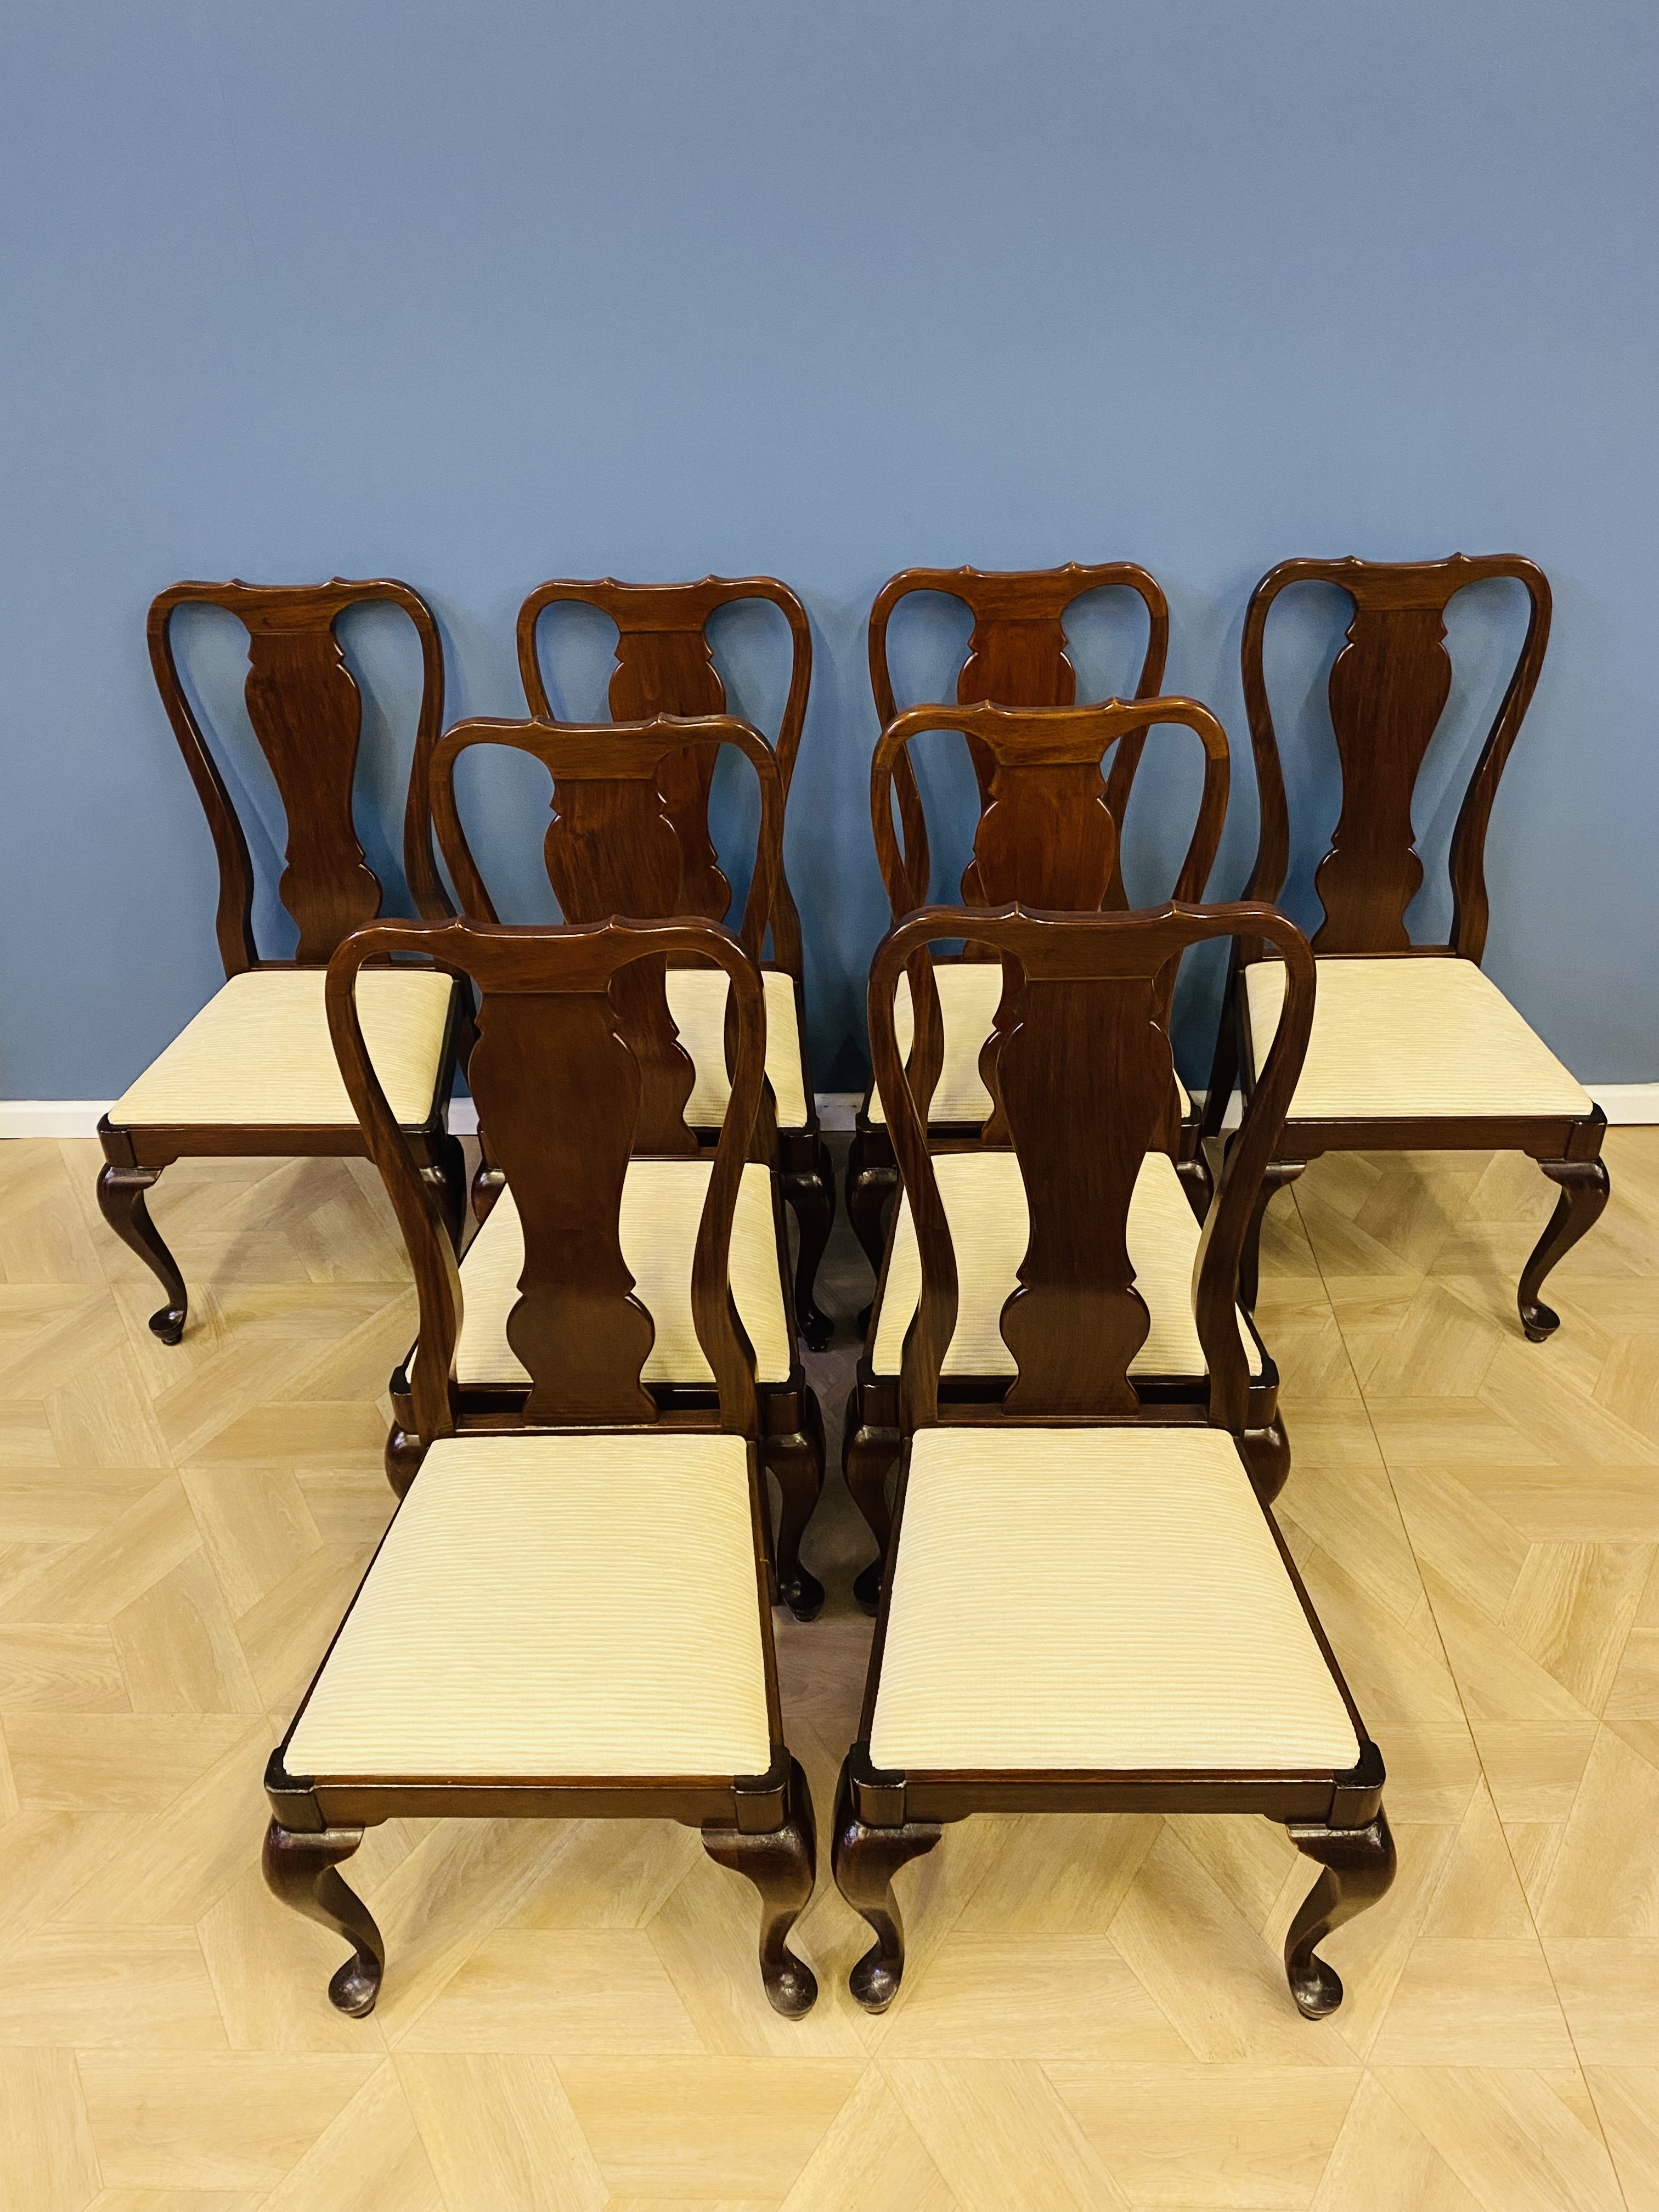 Set of eight Queen Anne style hardwood dining chairs - Image 7 of 7